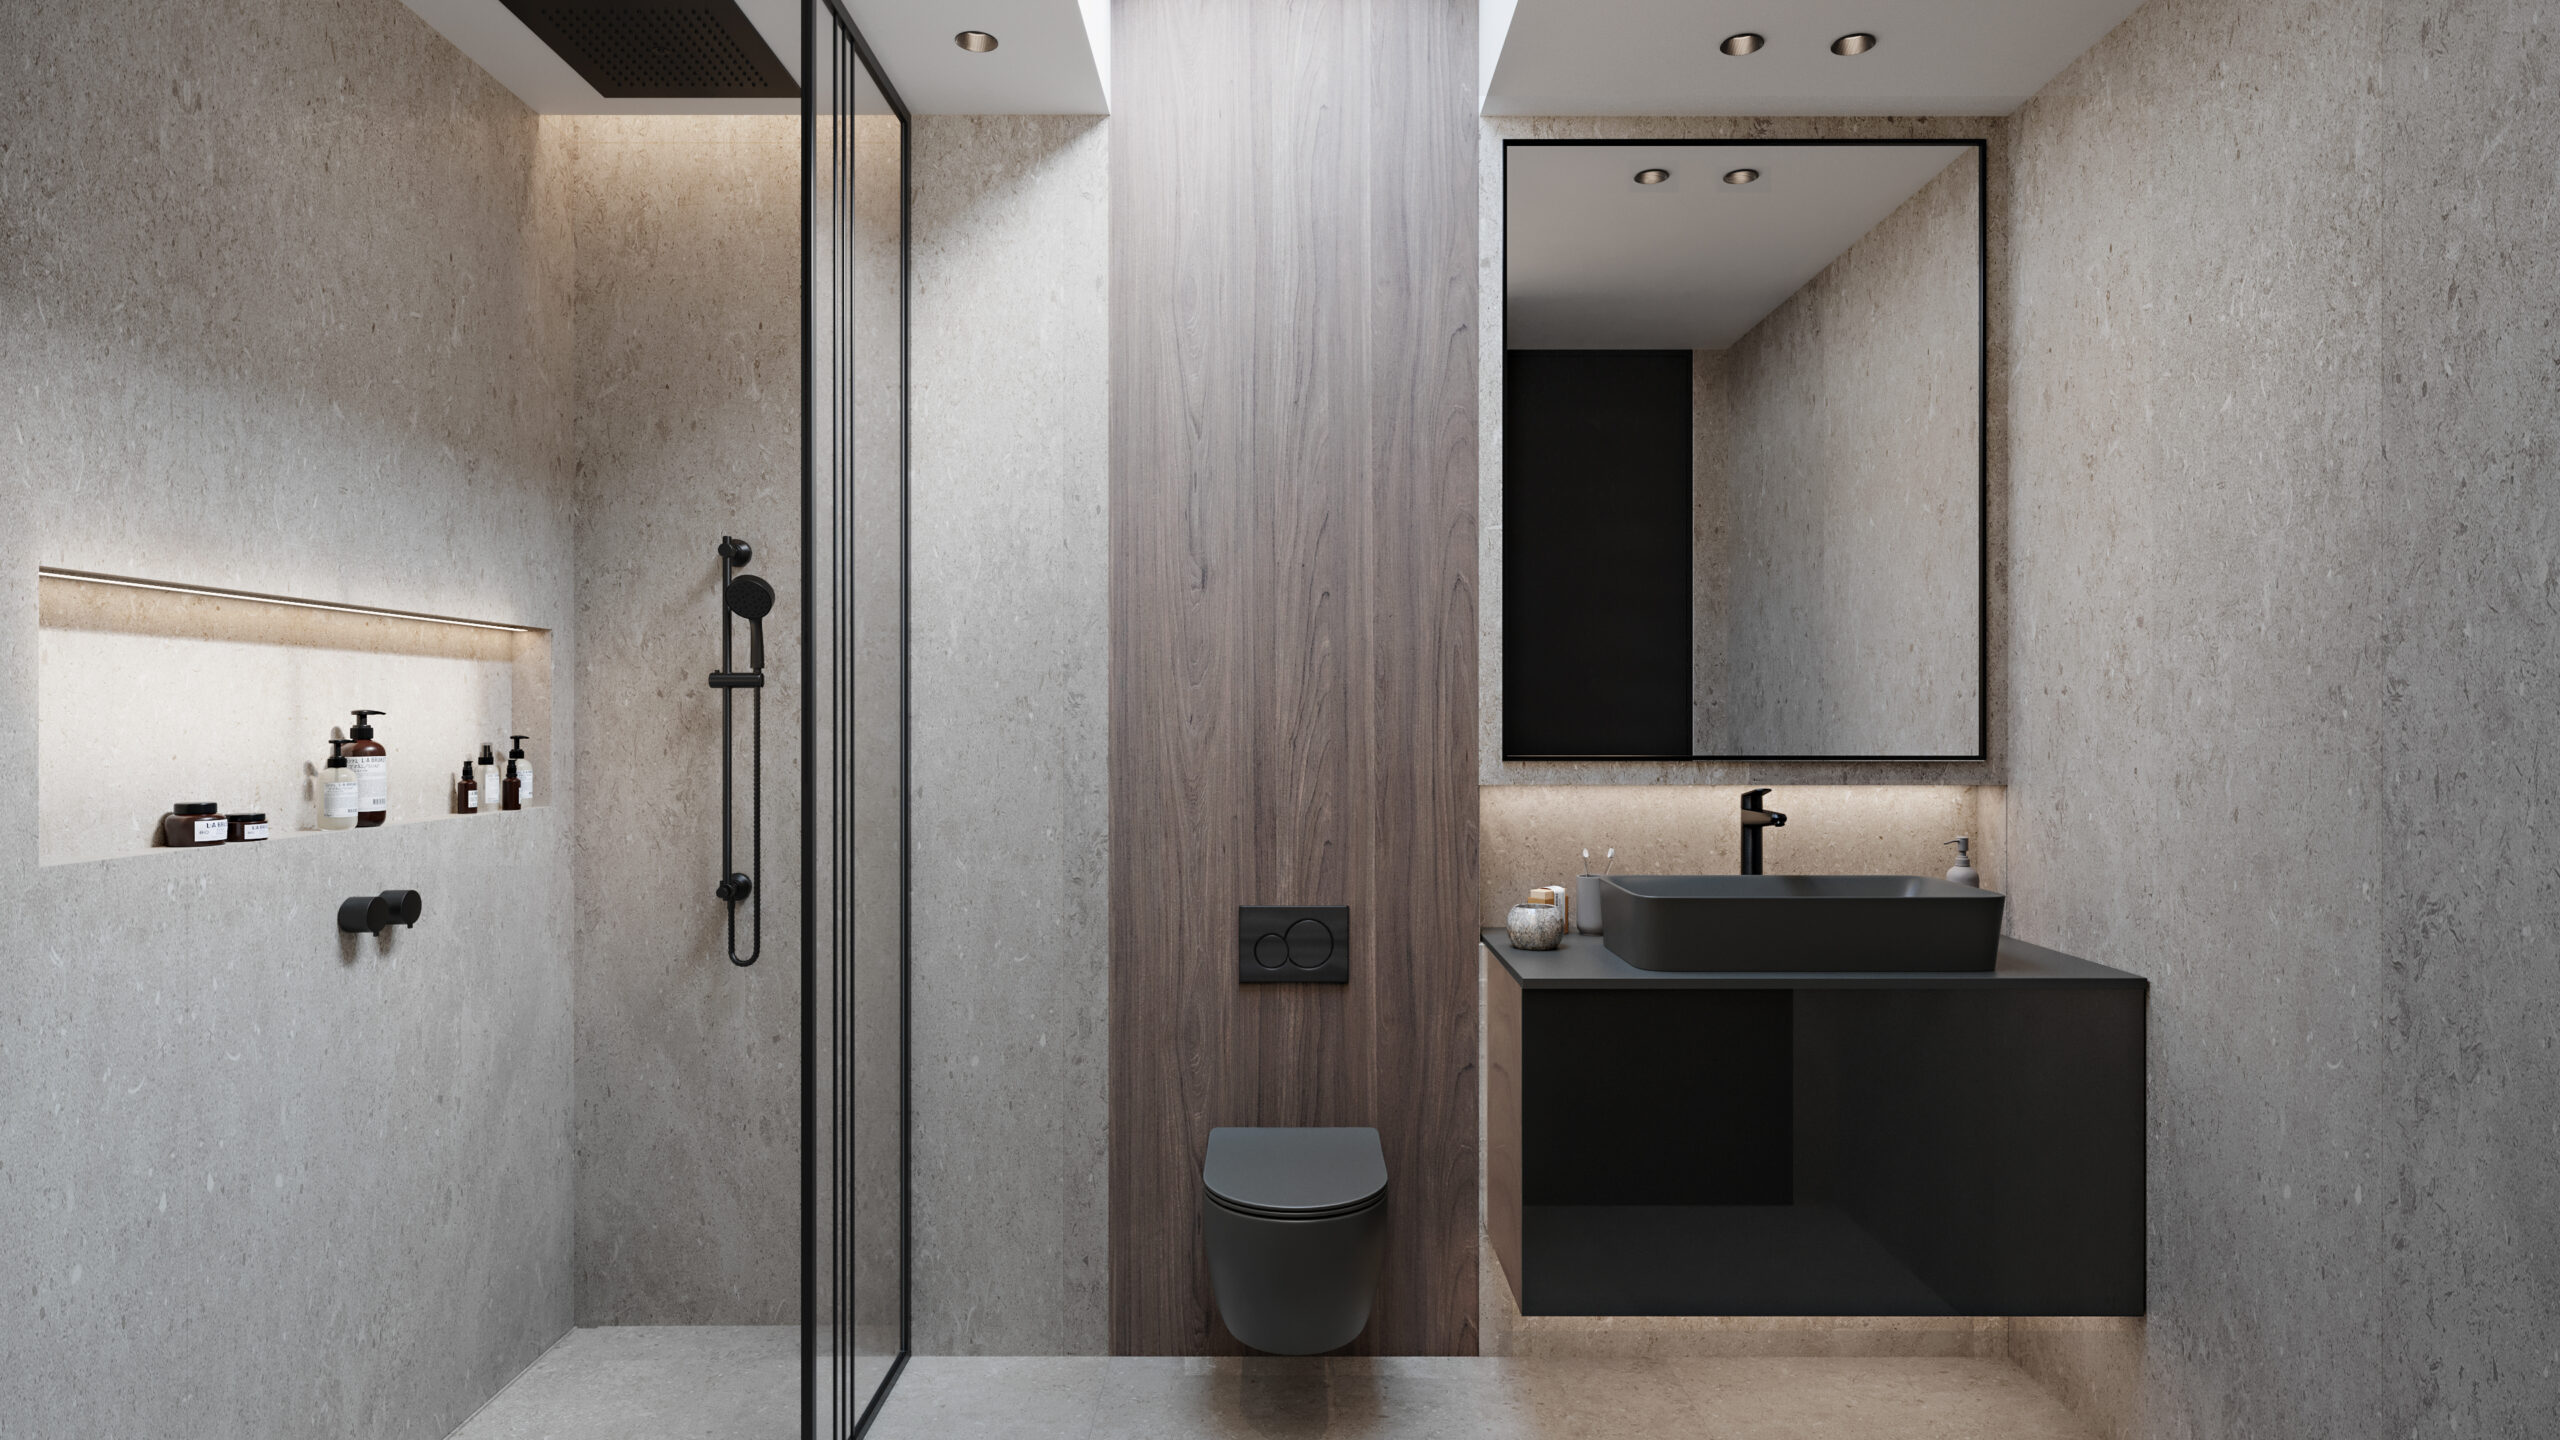 Image of a bathroom with cabinets made with Thermally Fused Laminate in color Swedish Elm and Acrylic Laminates in Charcoal in Gloss finish by Duramar.